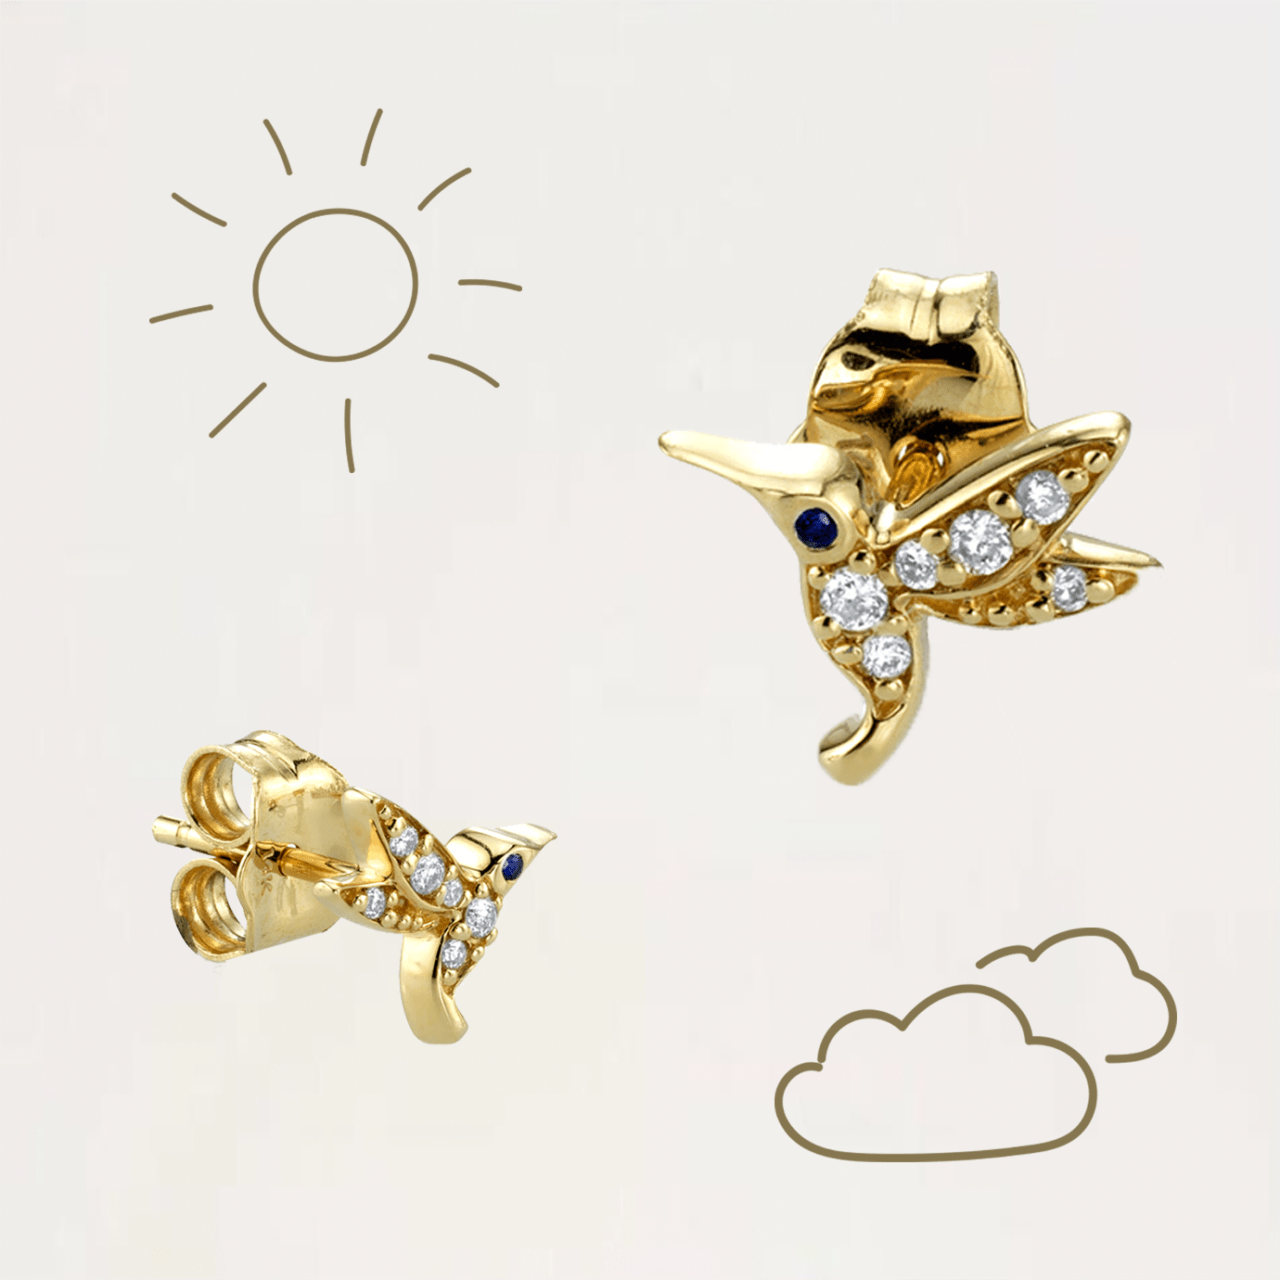 Golden hummingbird earrings with illustrations of clouds and sun.